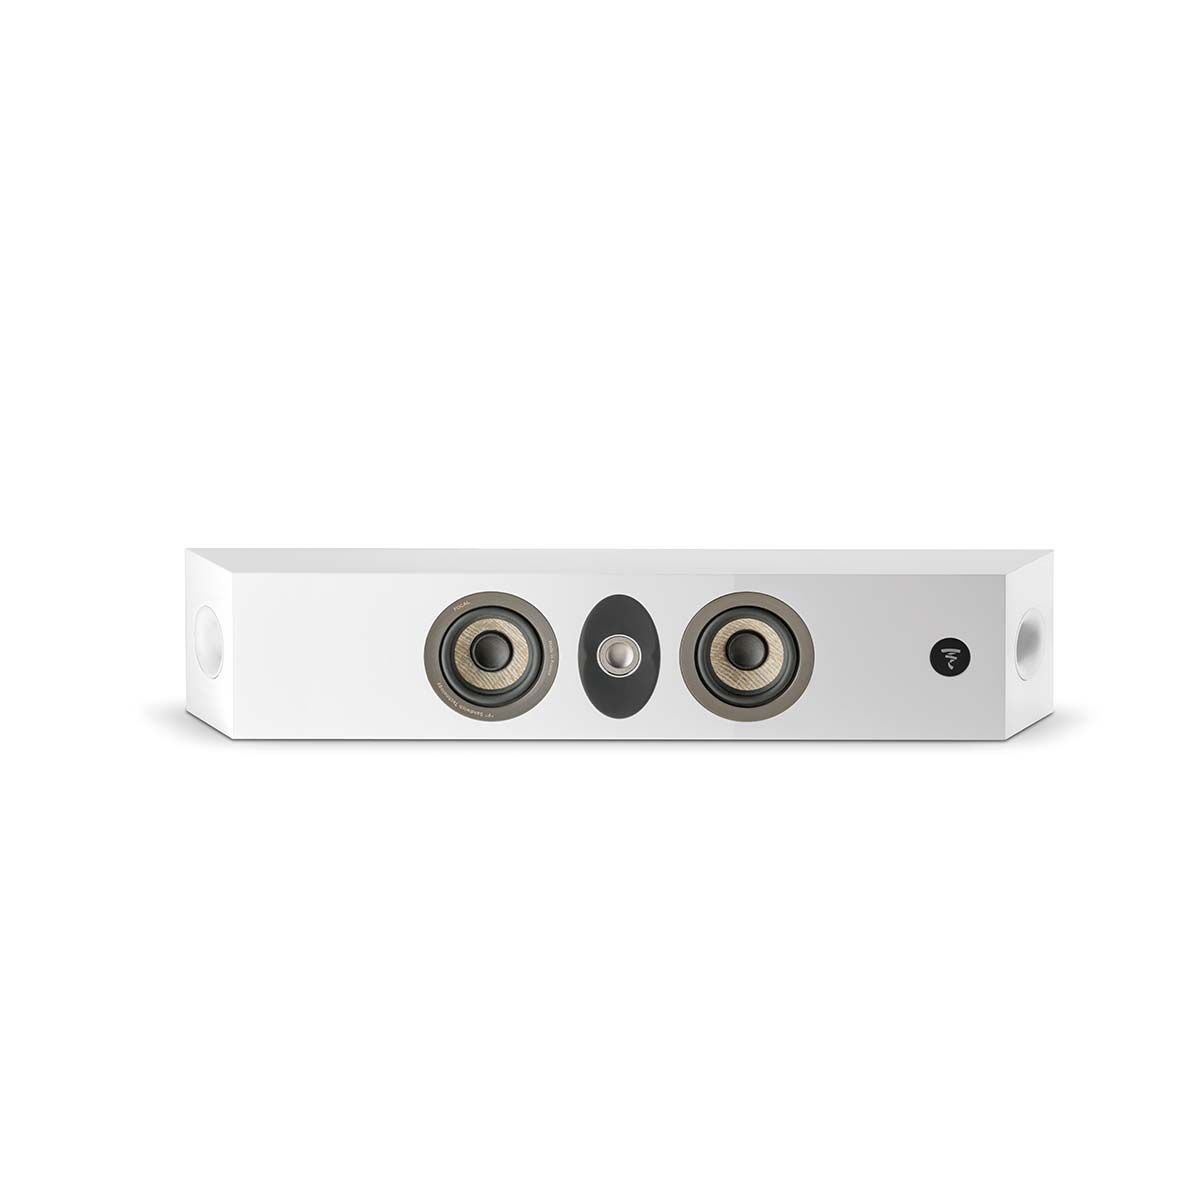 Focal On Wall 301 Speaker, Gloss White, horizontal front view without grille